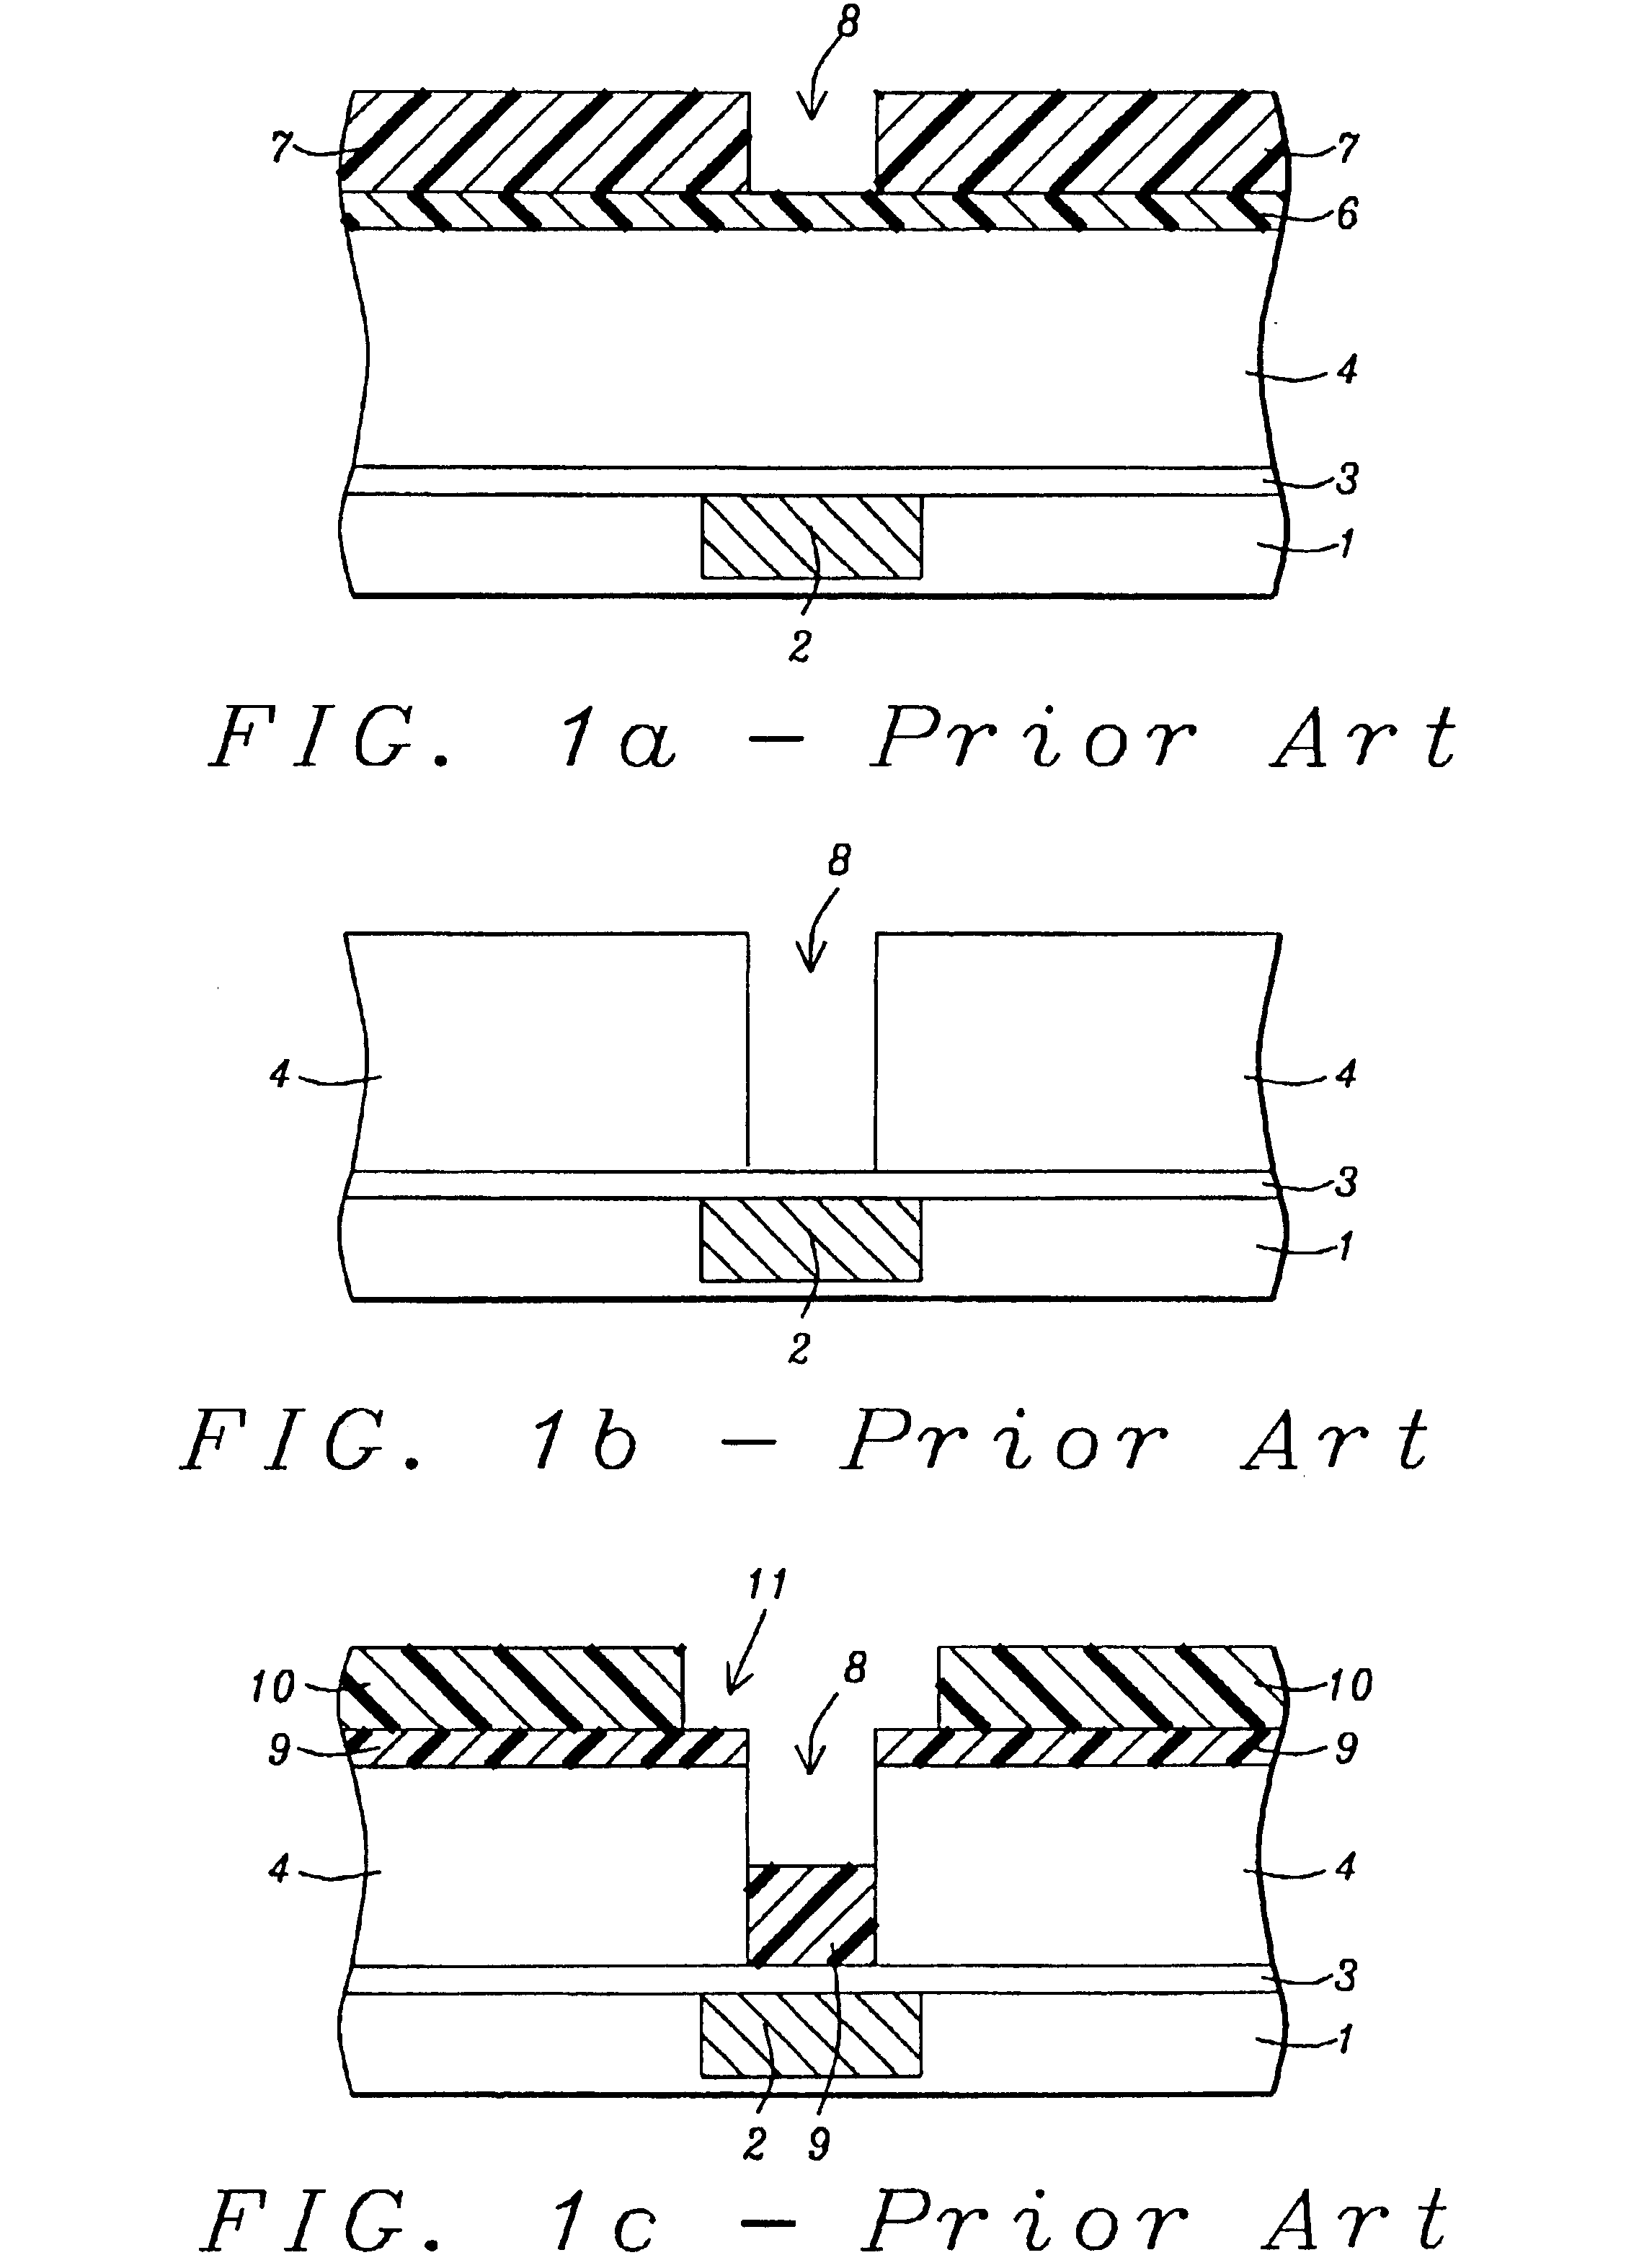 Method to form Cu/OSG dual damascene structure for high performance and reliable interconnects